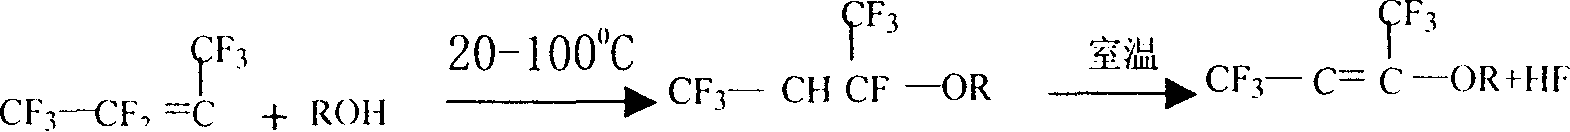 Removed method for poisonous component of cleaved product in hexafluoropropylene manufacturing technique